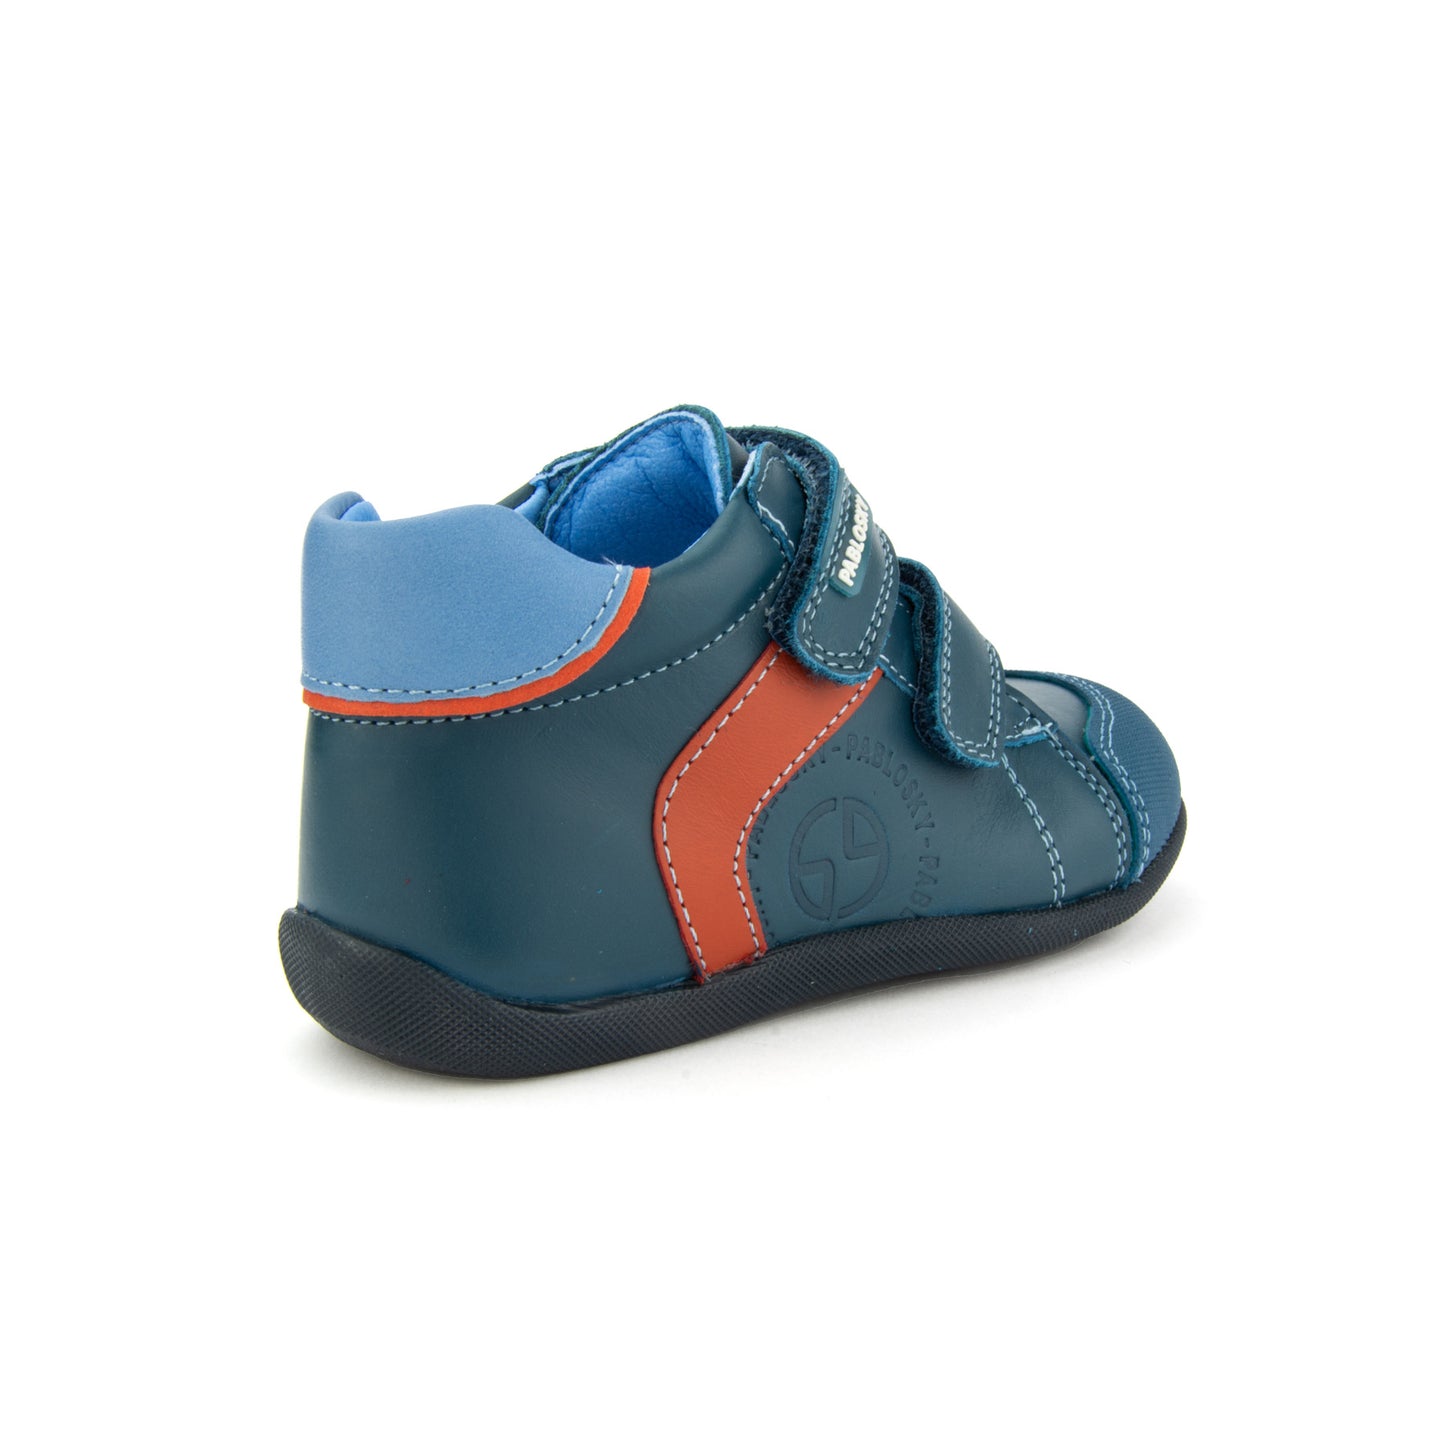 Pablosky High Ankle Shoes